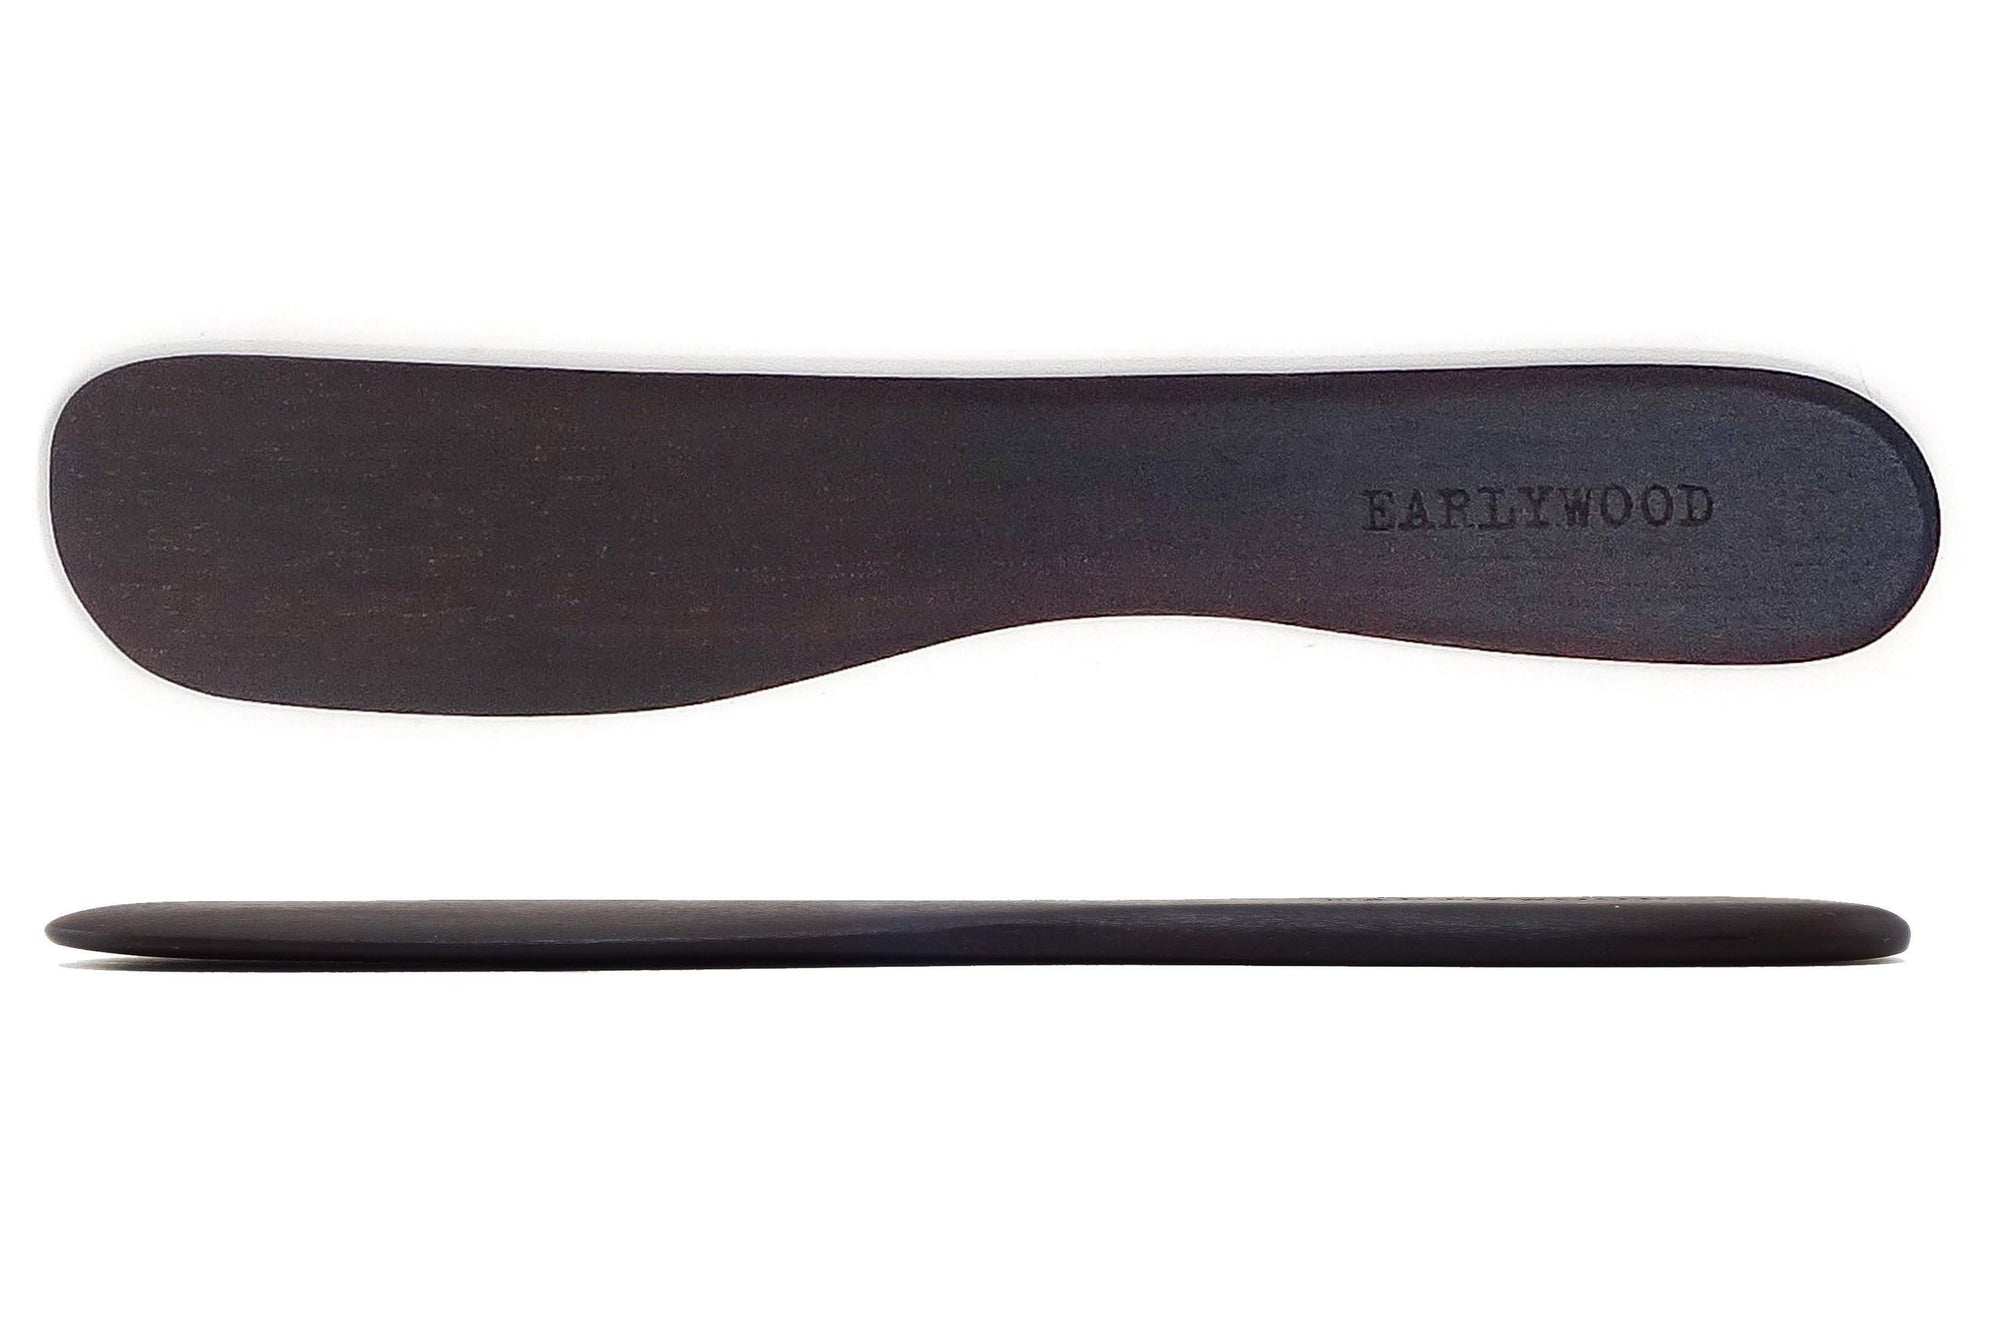 wooden butter knife in ebony - made by Earlywood